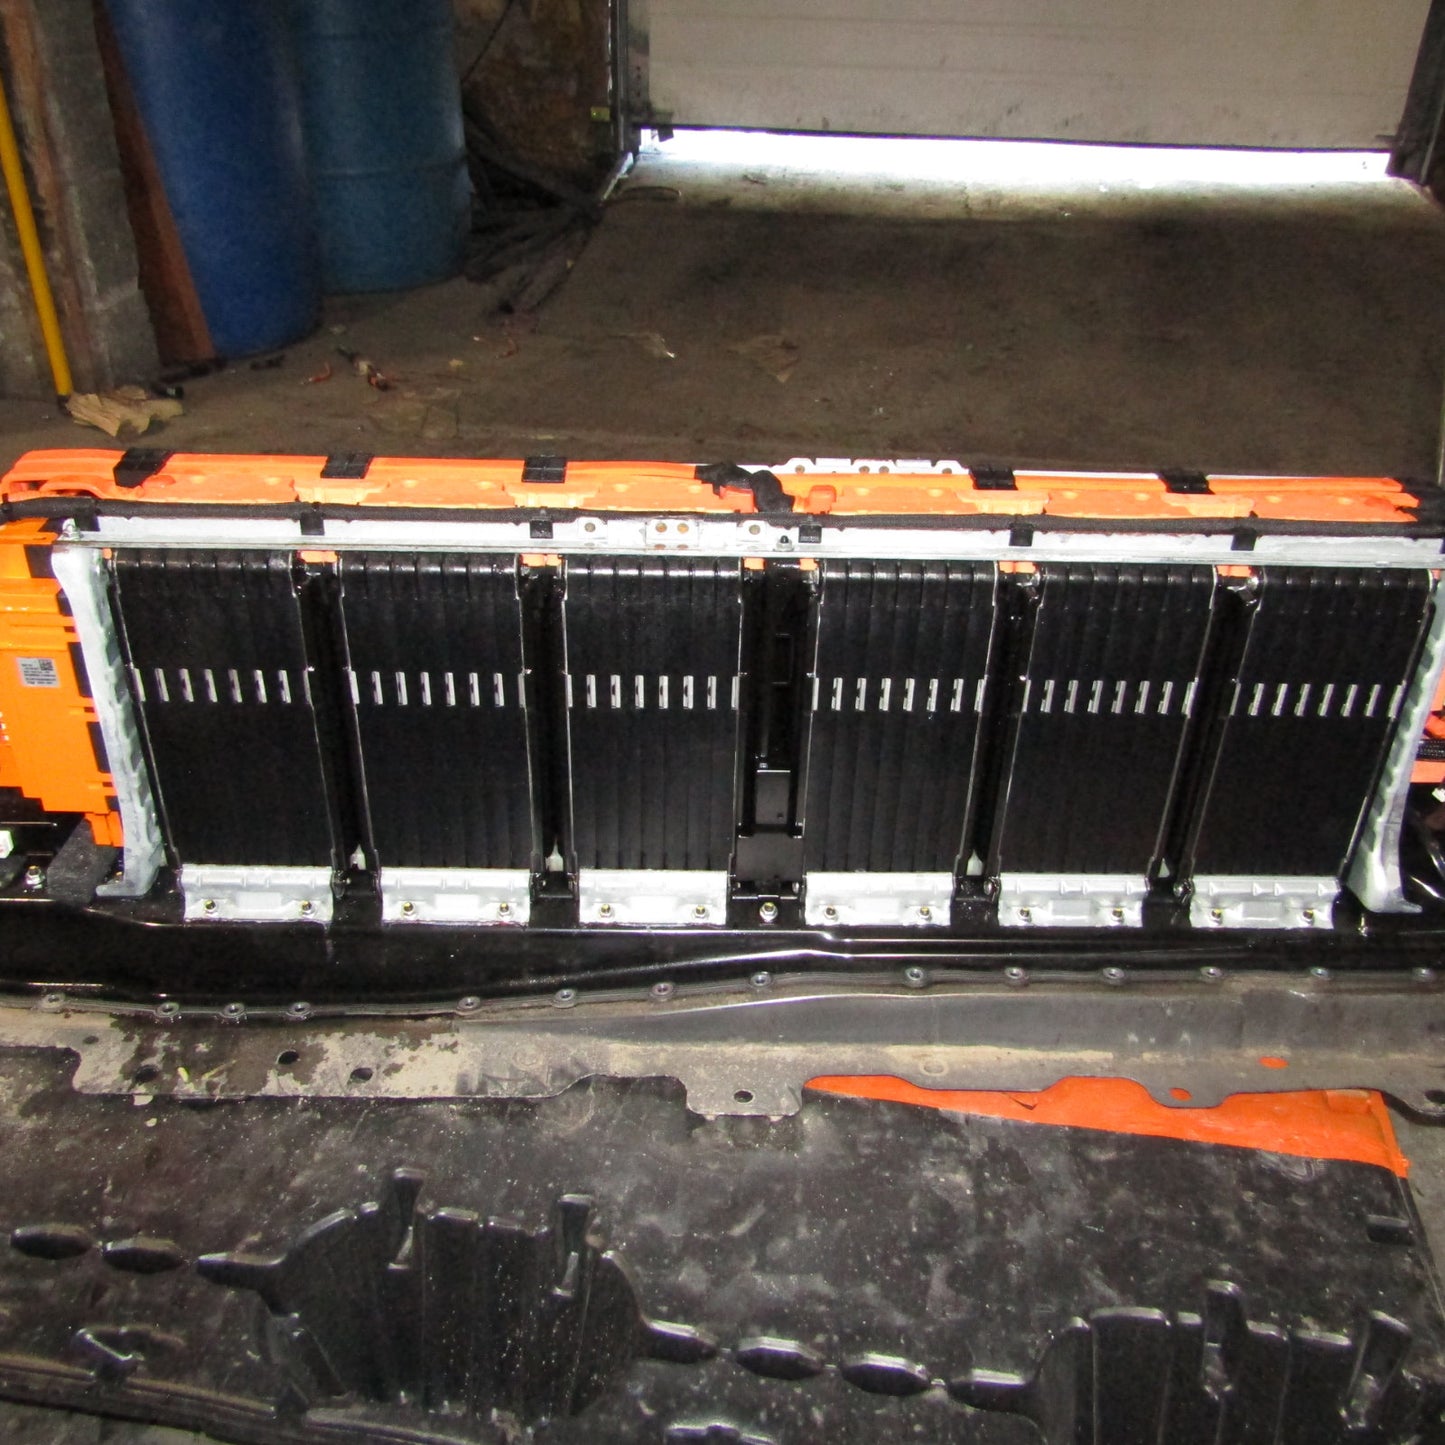 Volvo XC90 / 18.8 kWh / Battery Pack - with Damaged Plugs - order of 10x